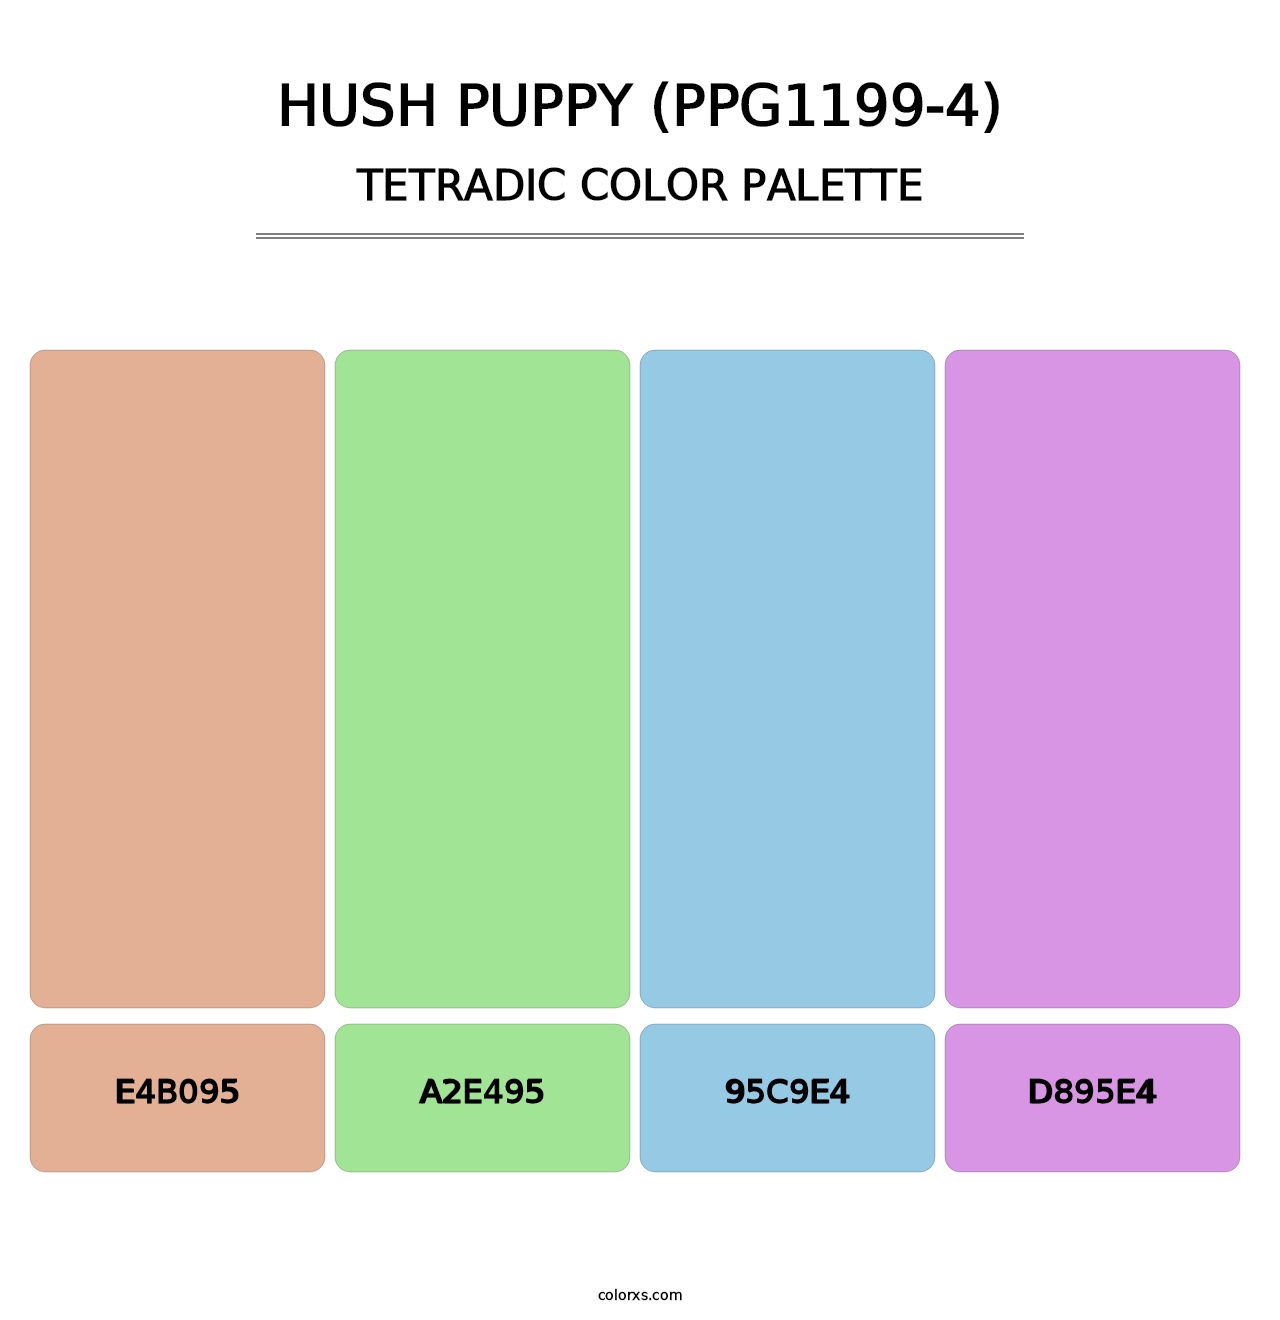 Hush Puppy (PPG1199-4) - Tetradic Color Palette